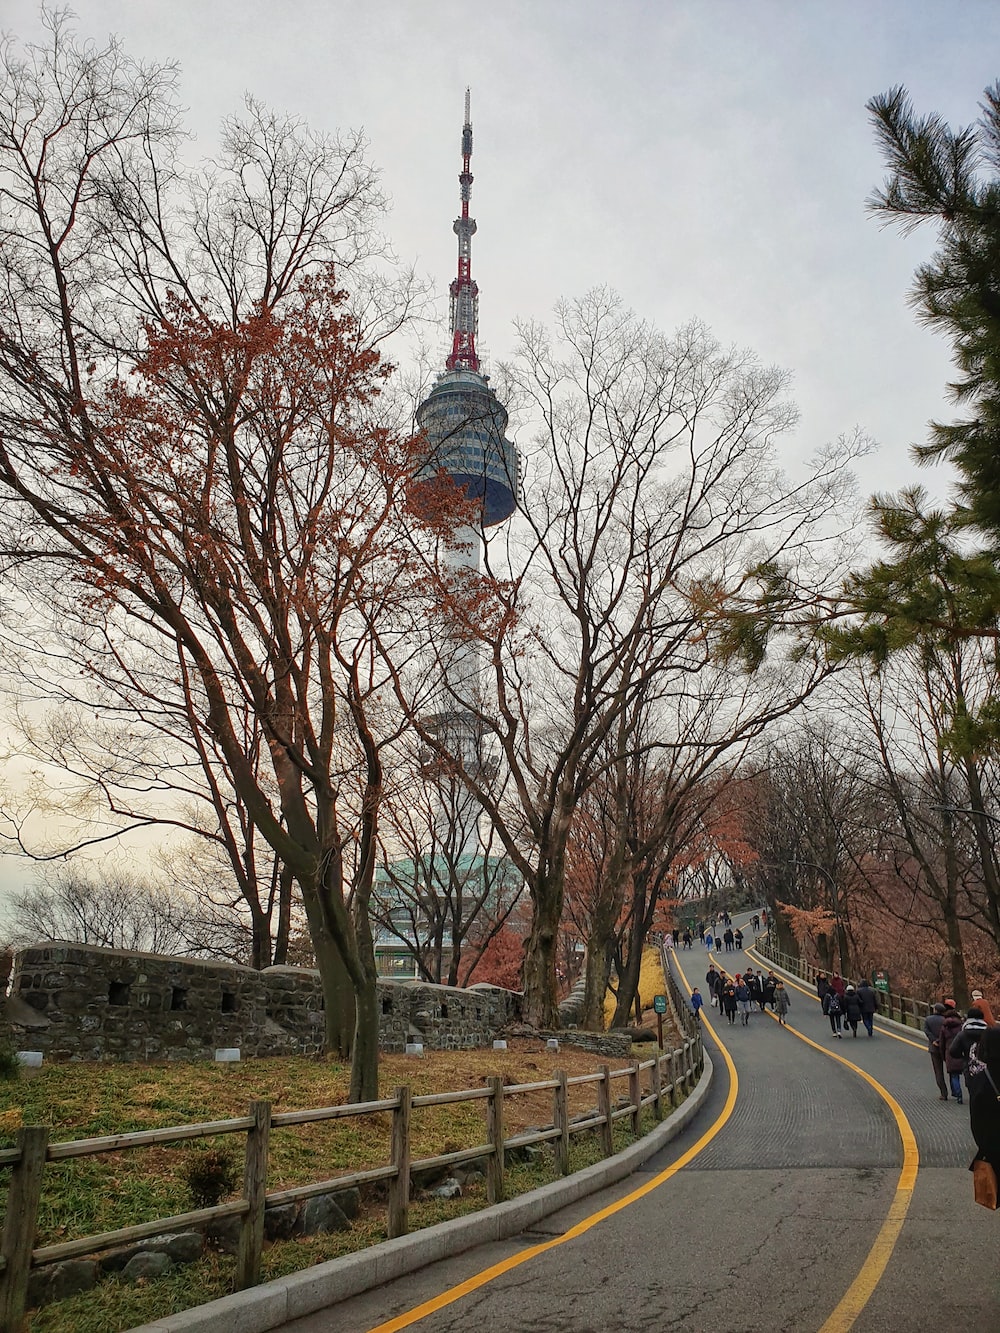 Seoul Tower Picture. Download Free Image